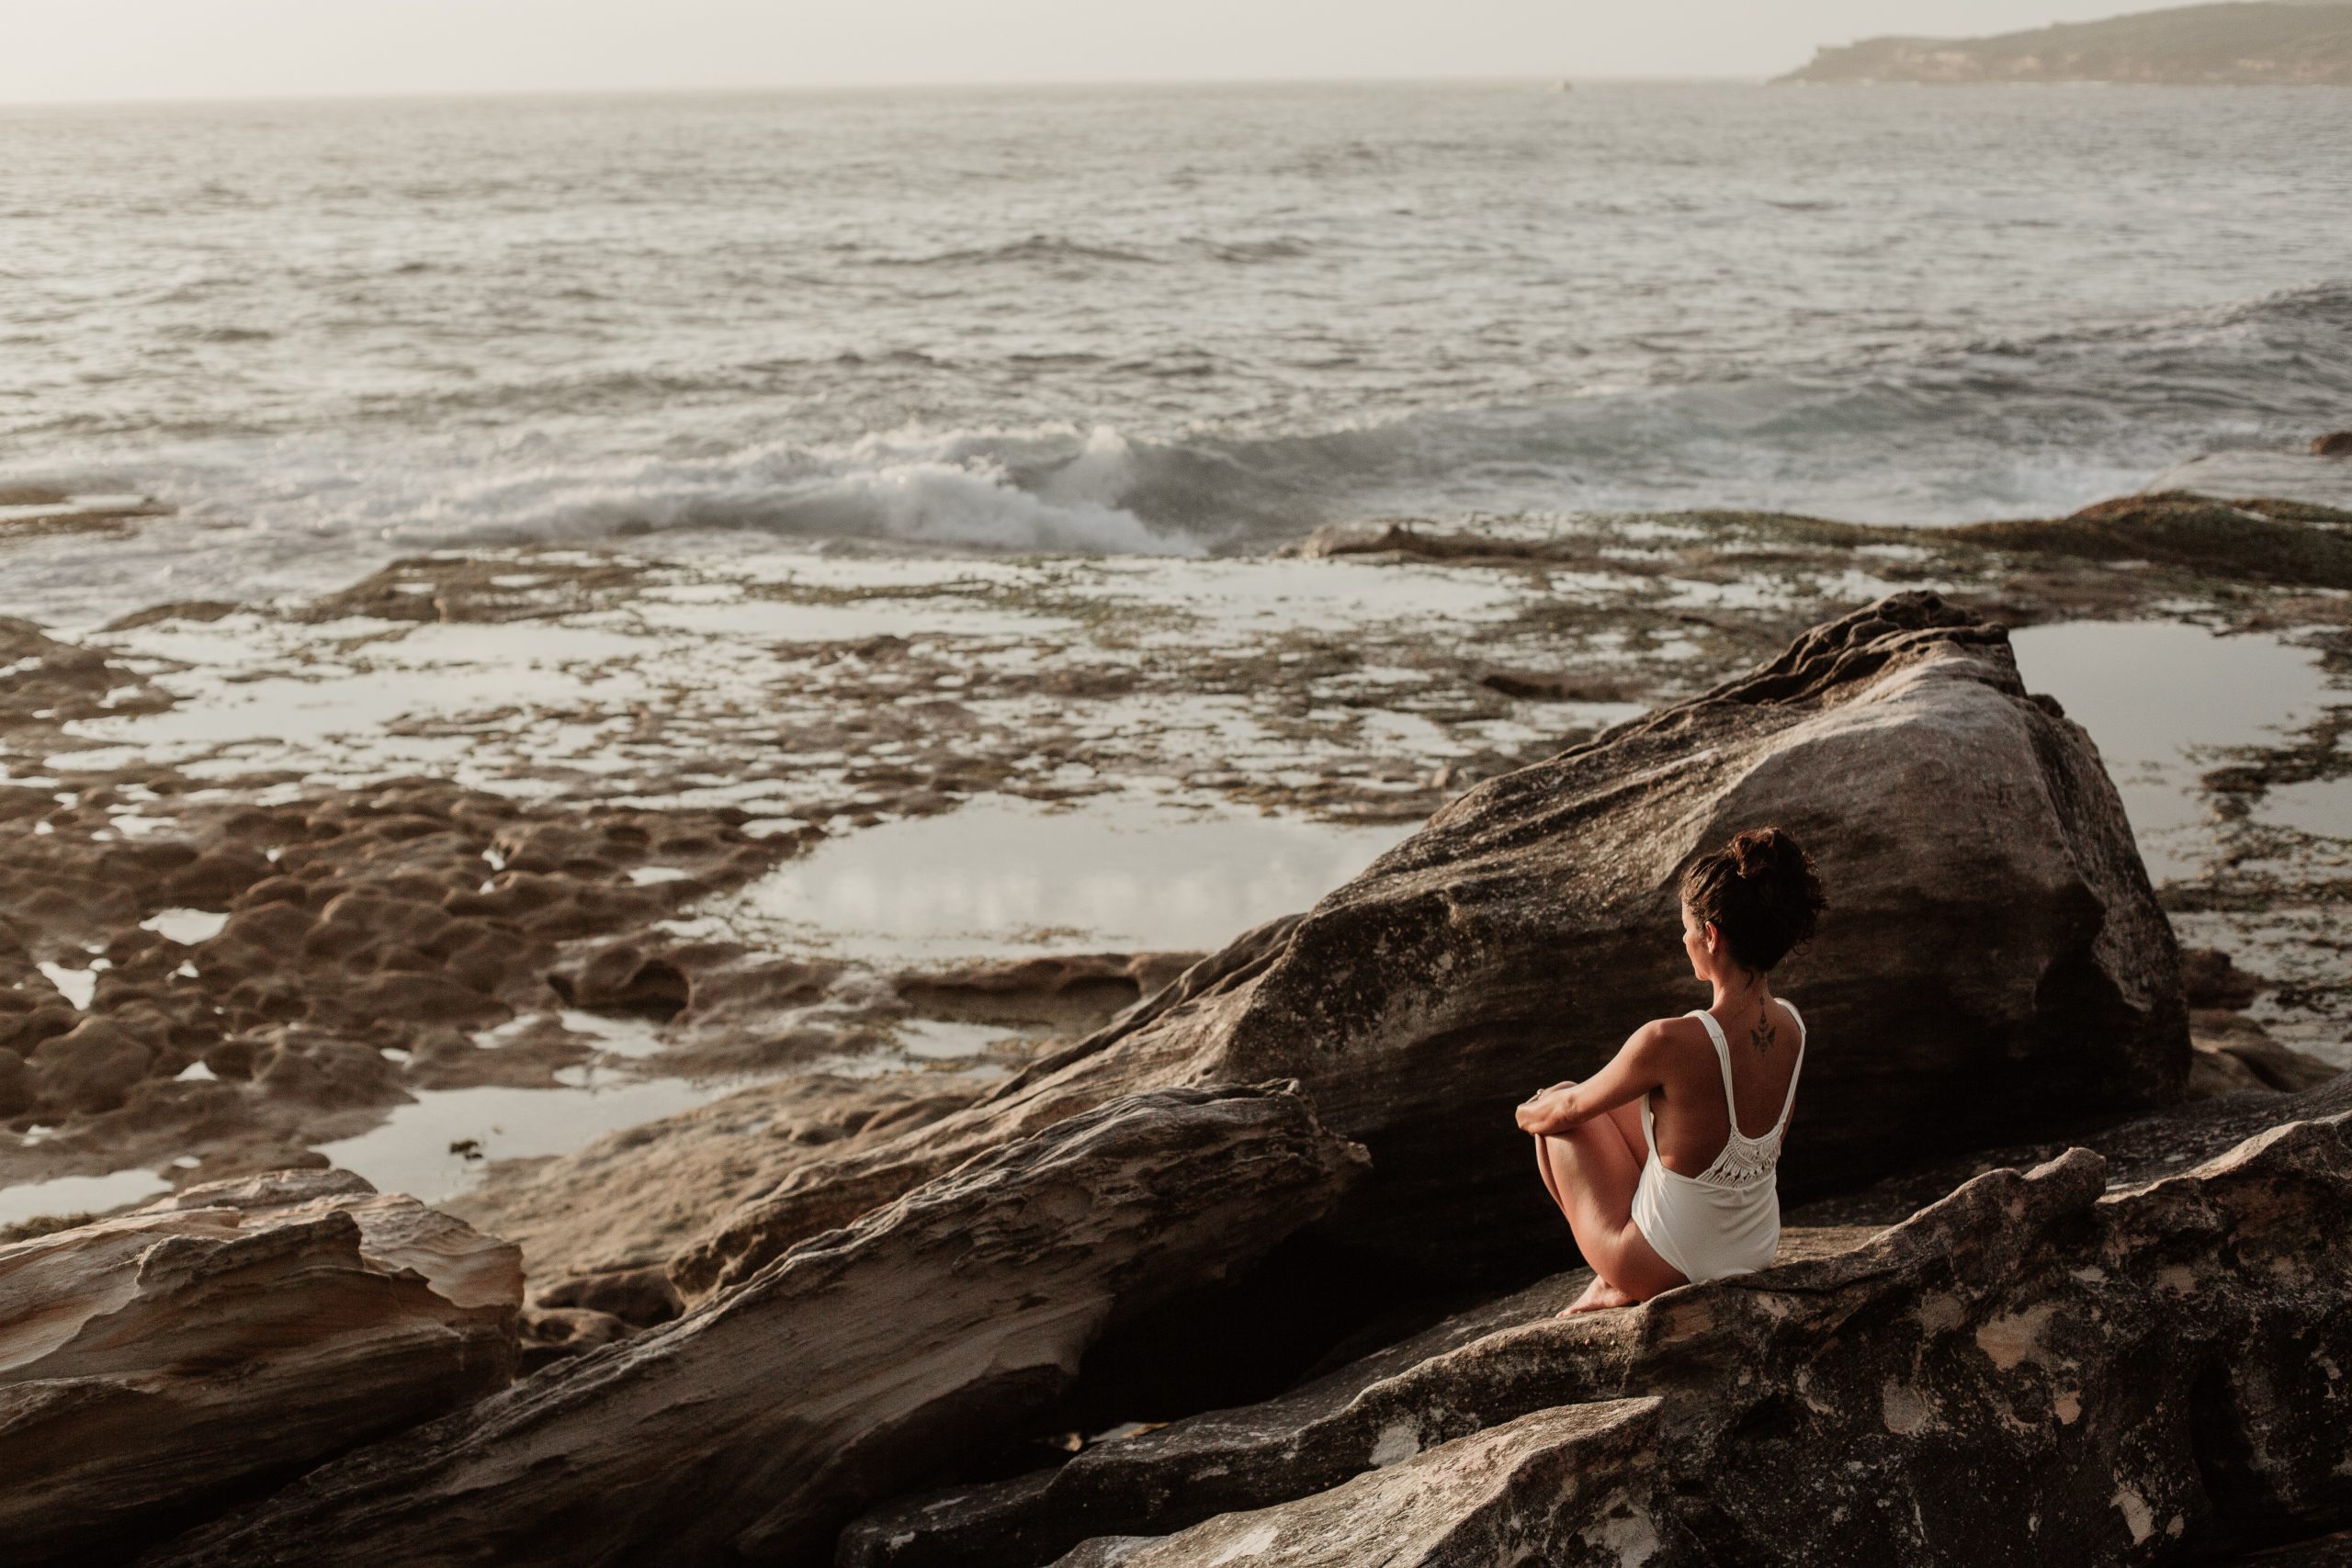 9 Questions Answered for Meditation Beginners